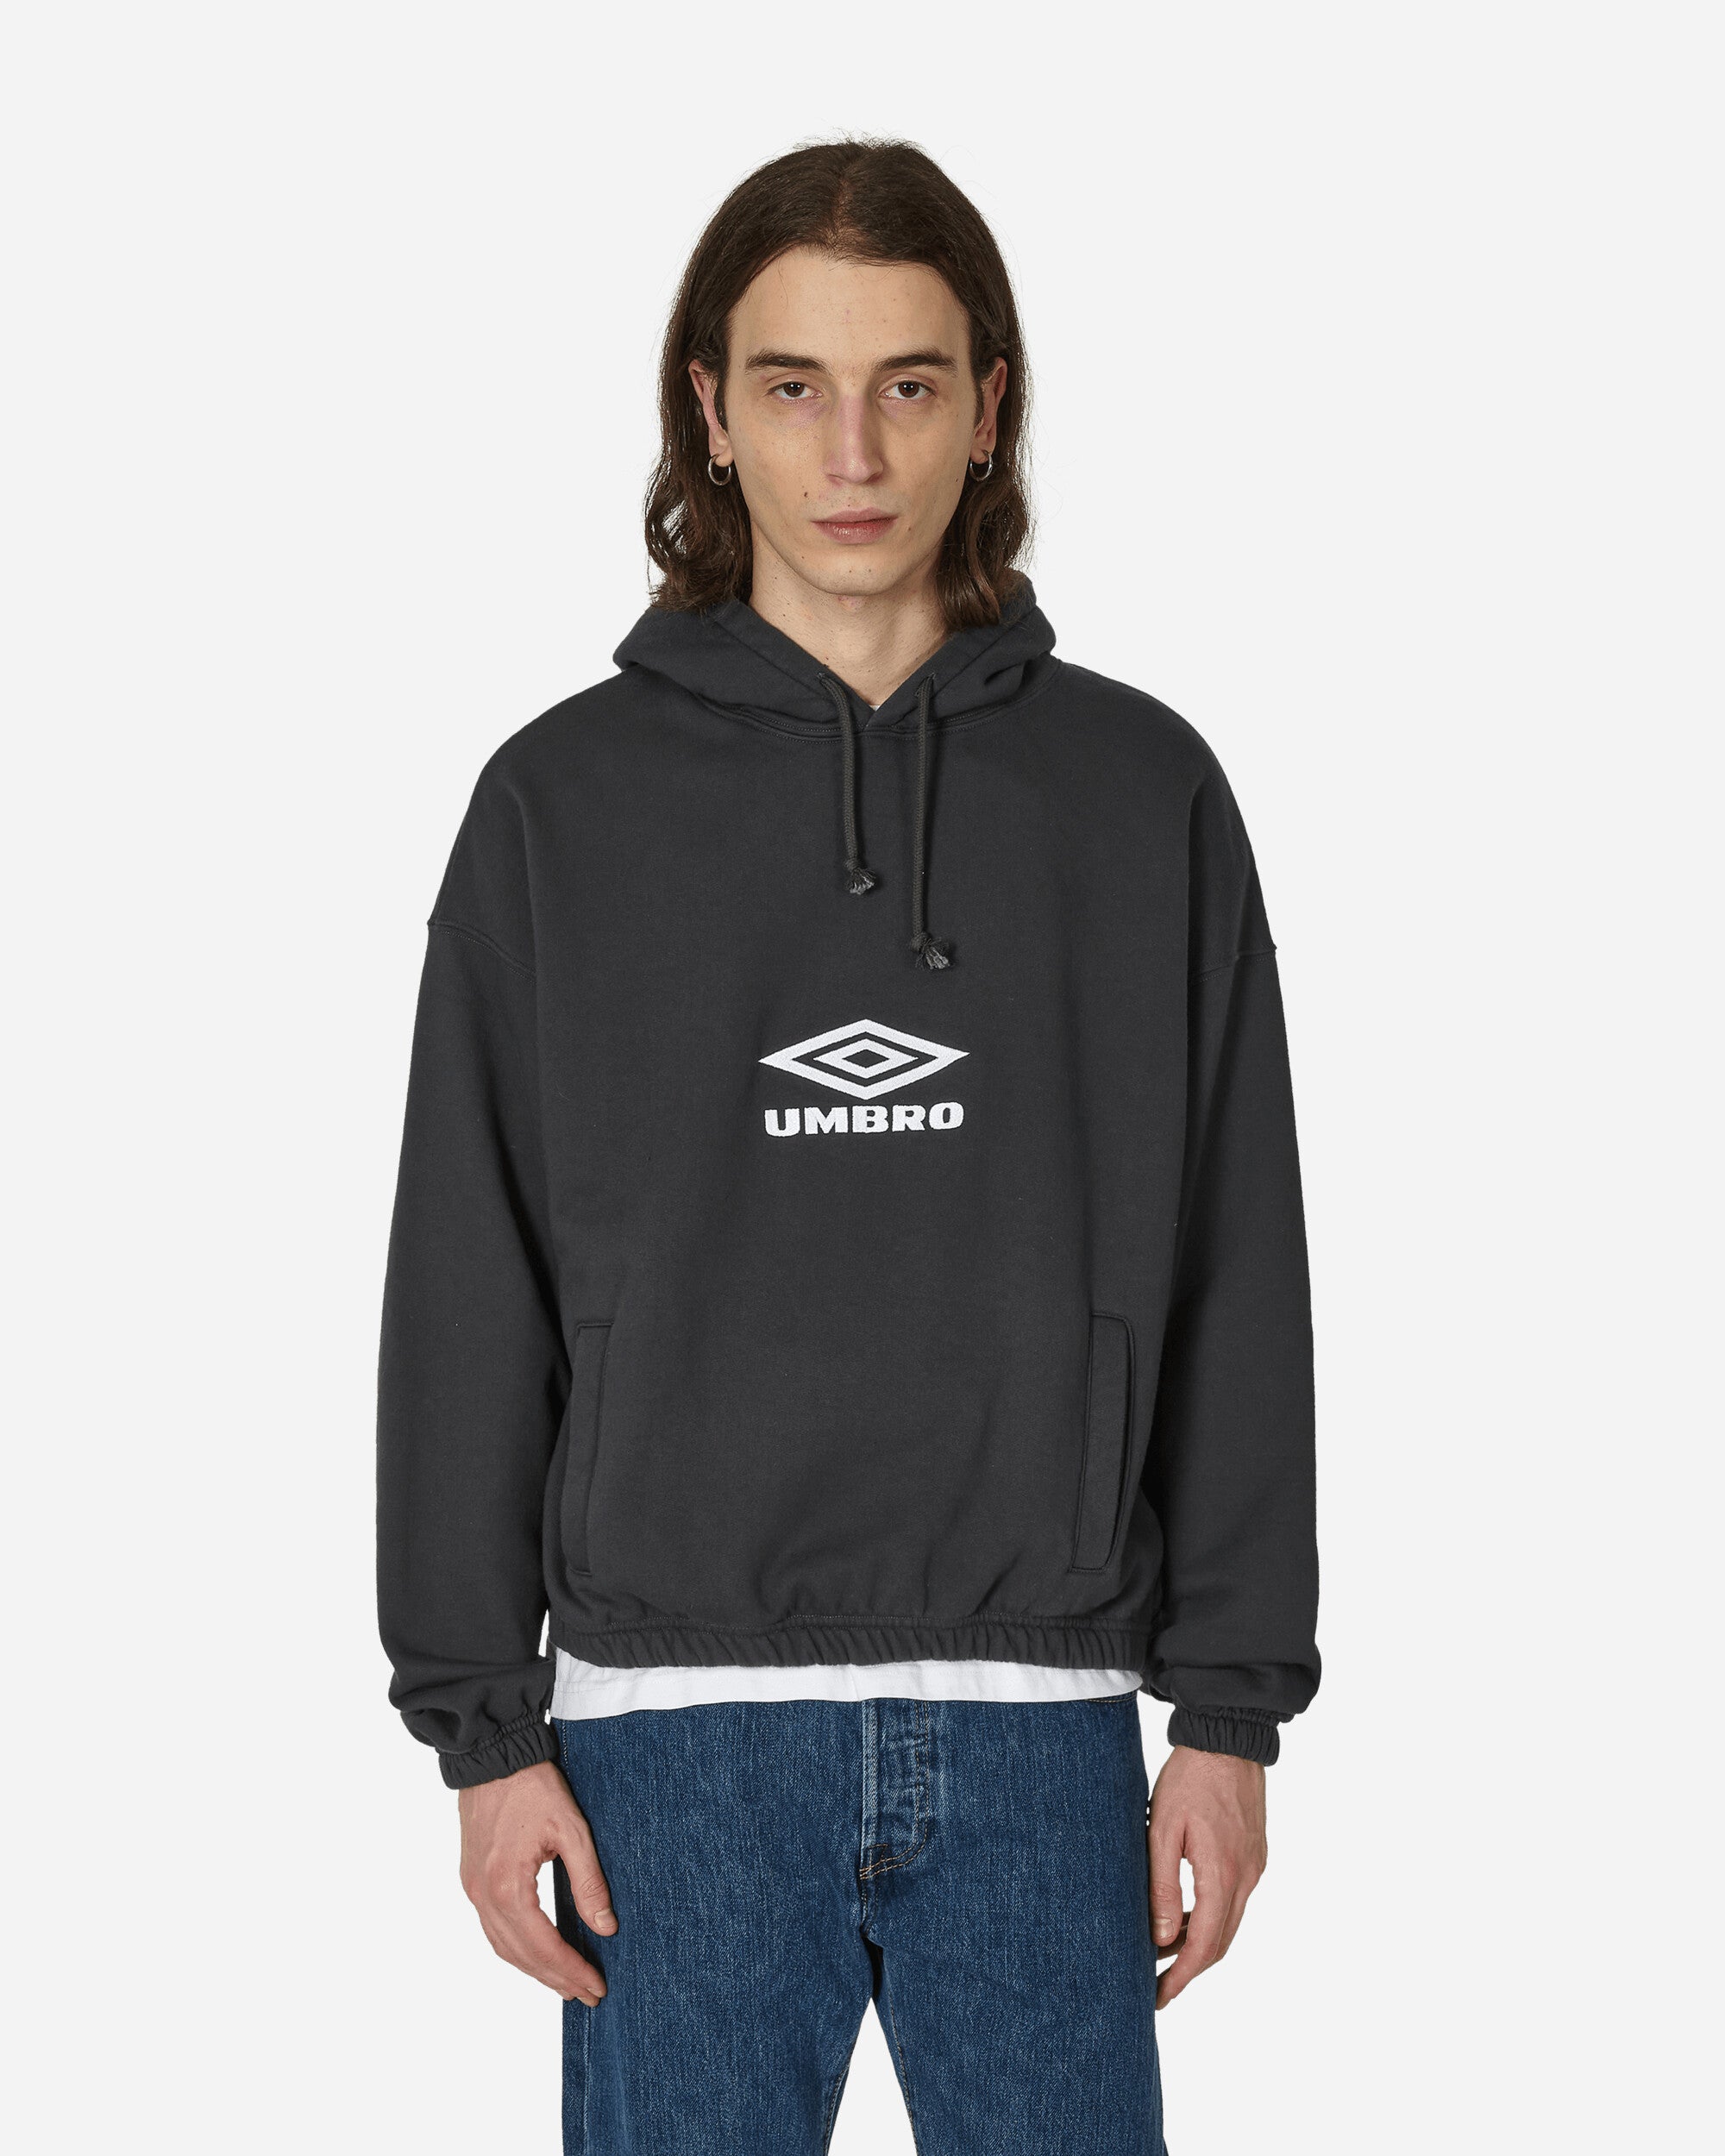 Umbro Hoodie with Integrated Mask